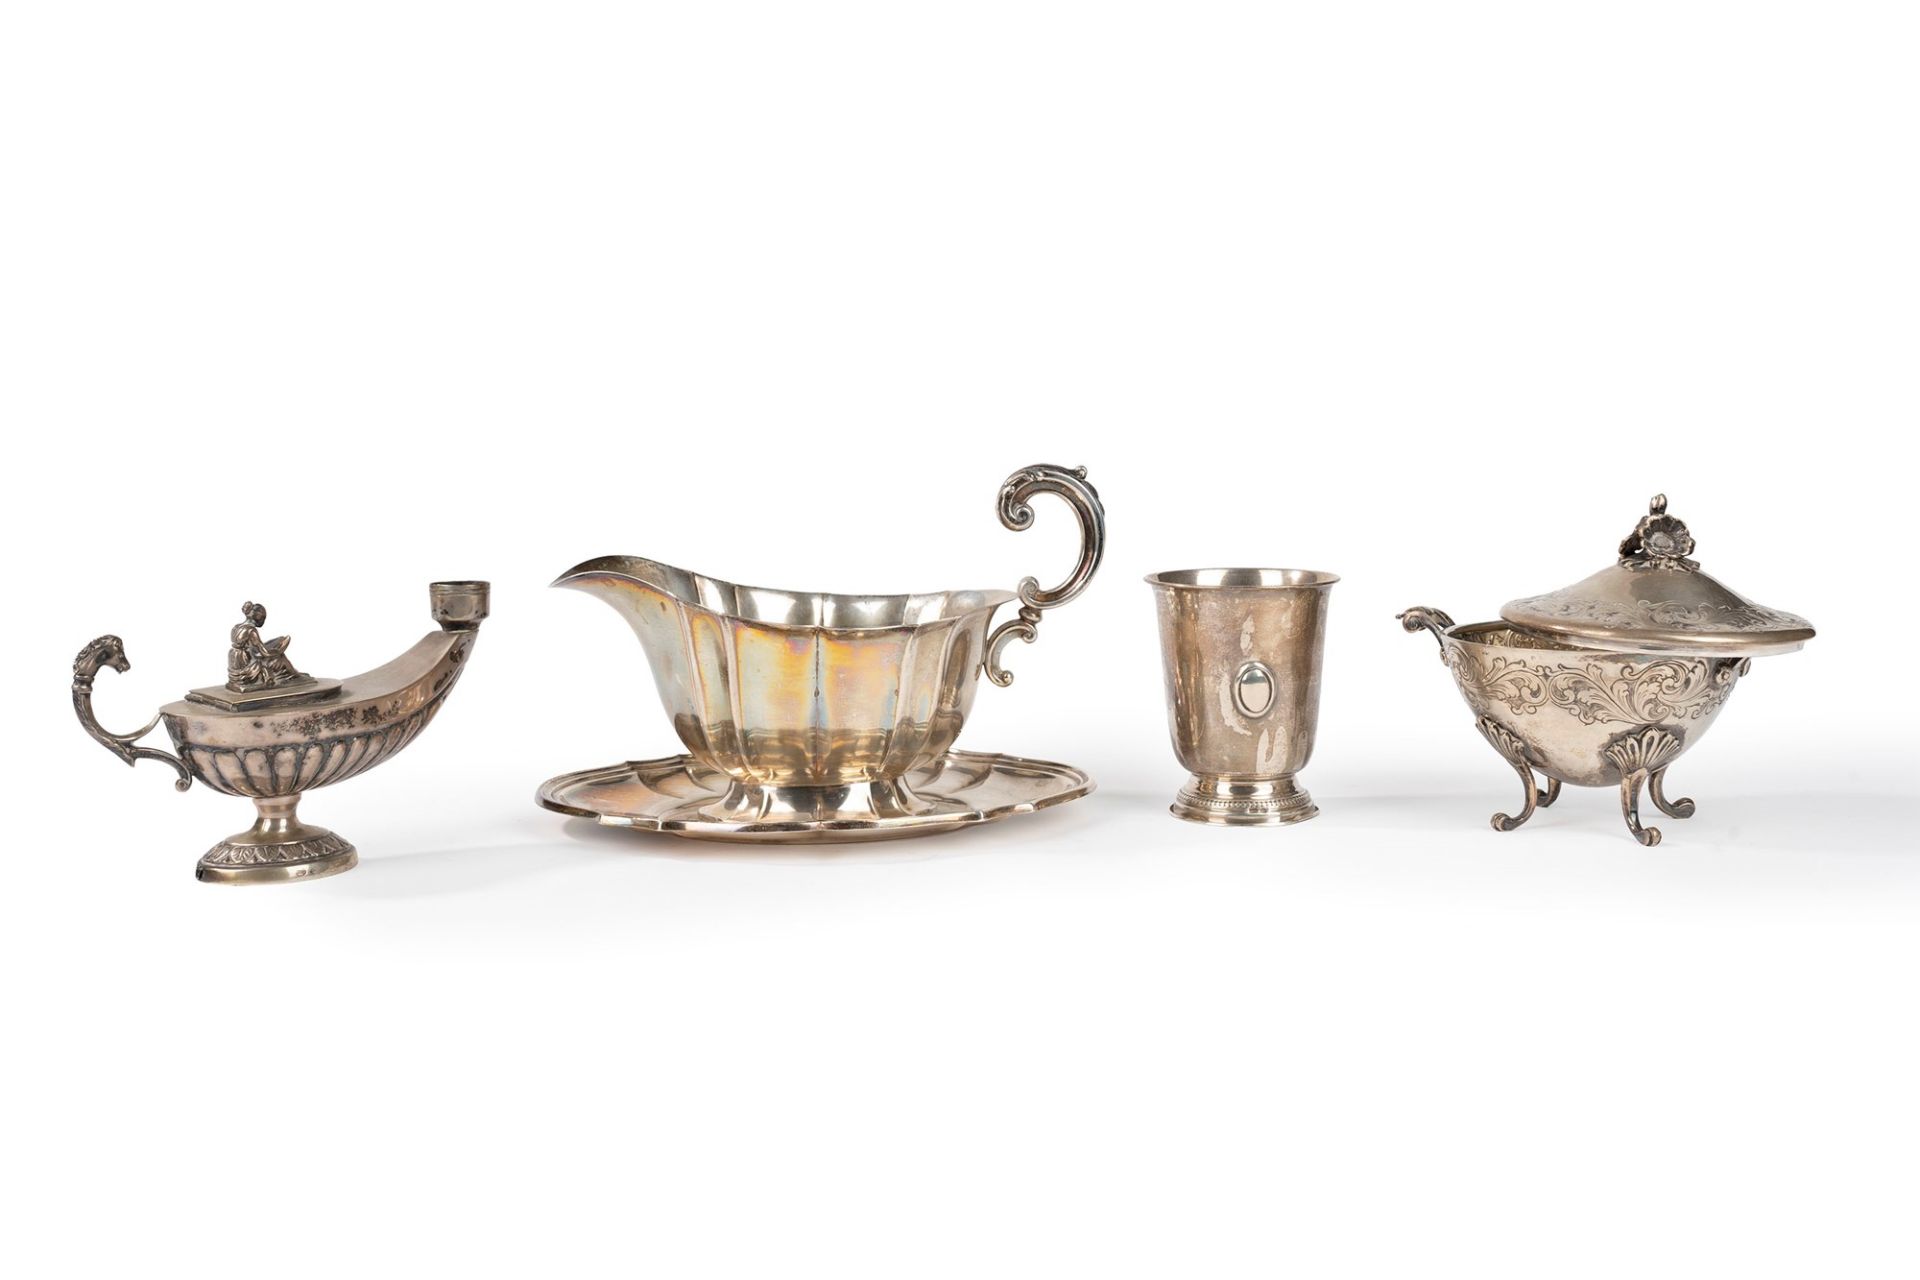 Lot made up of four silver furnishings, 20th century